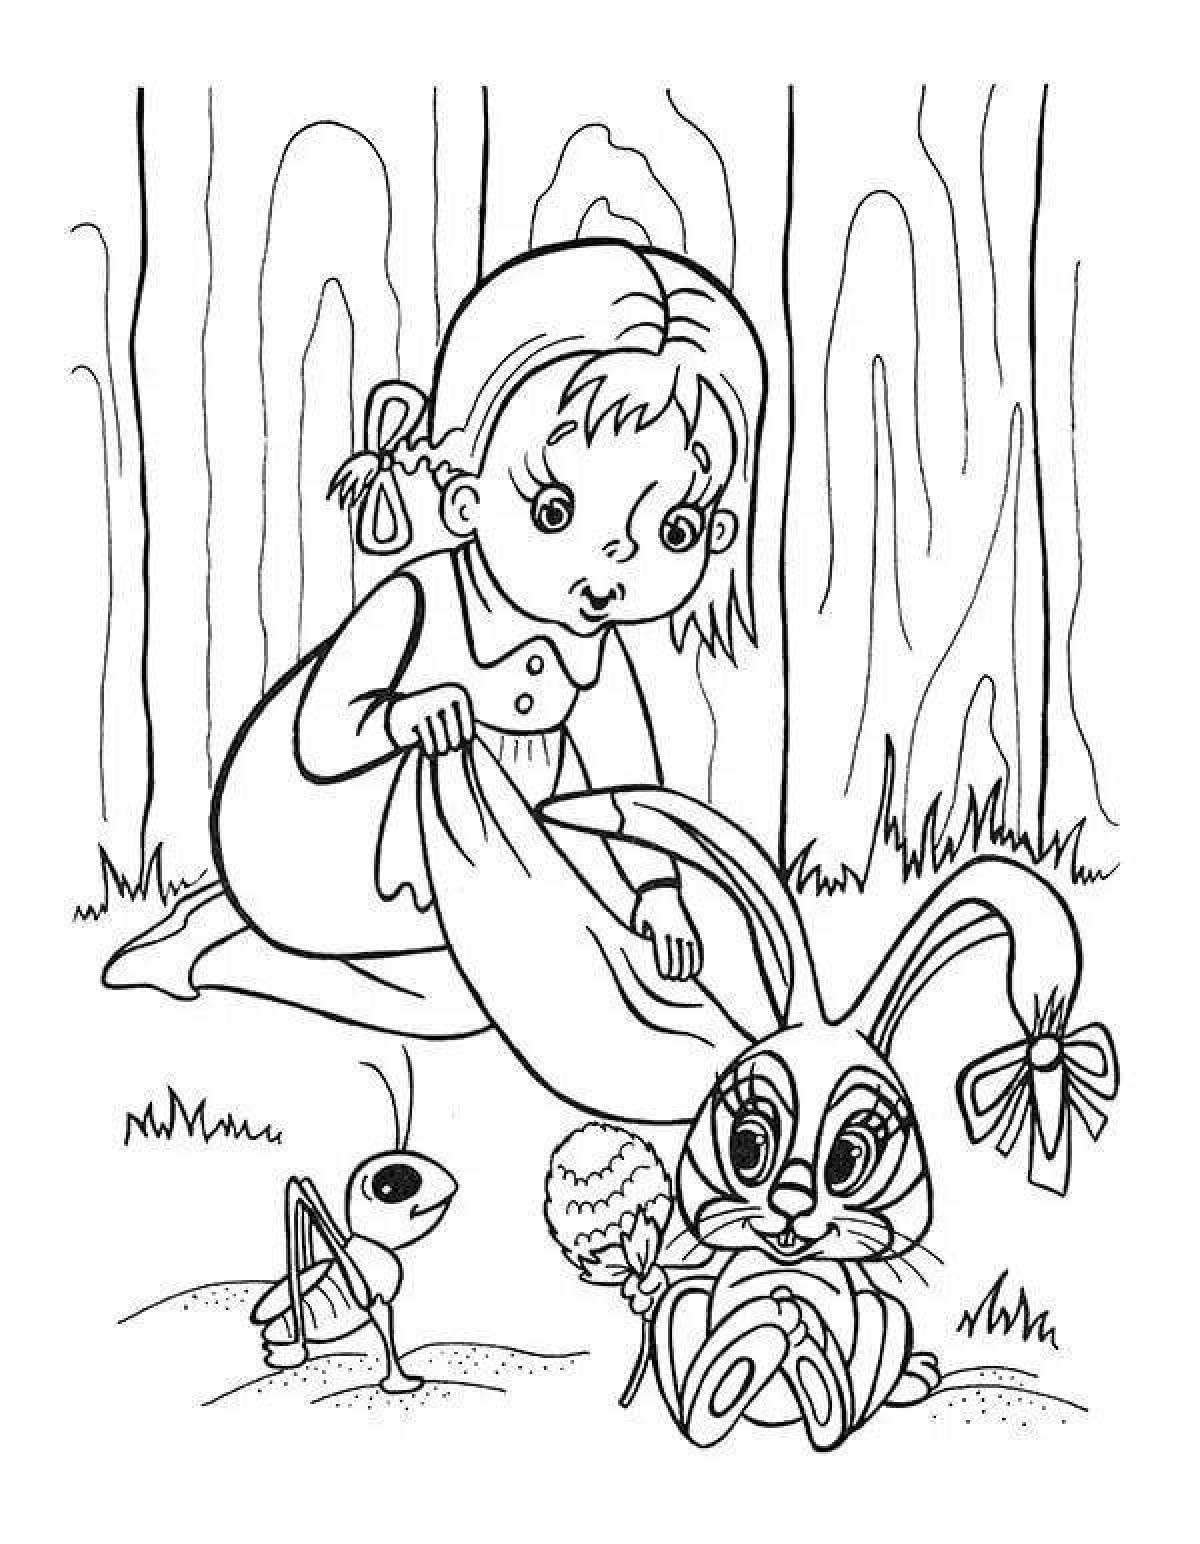 Awesome Soviet cartoon coloring pages